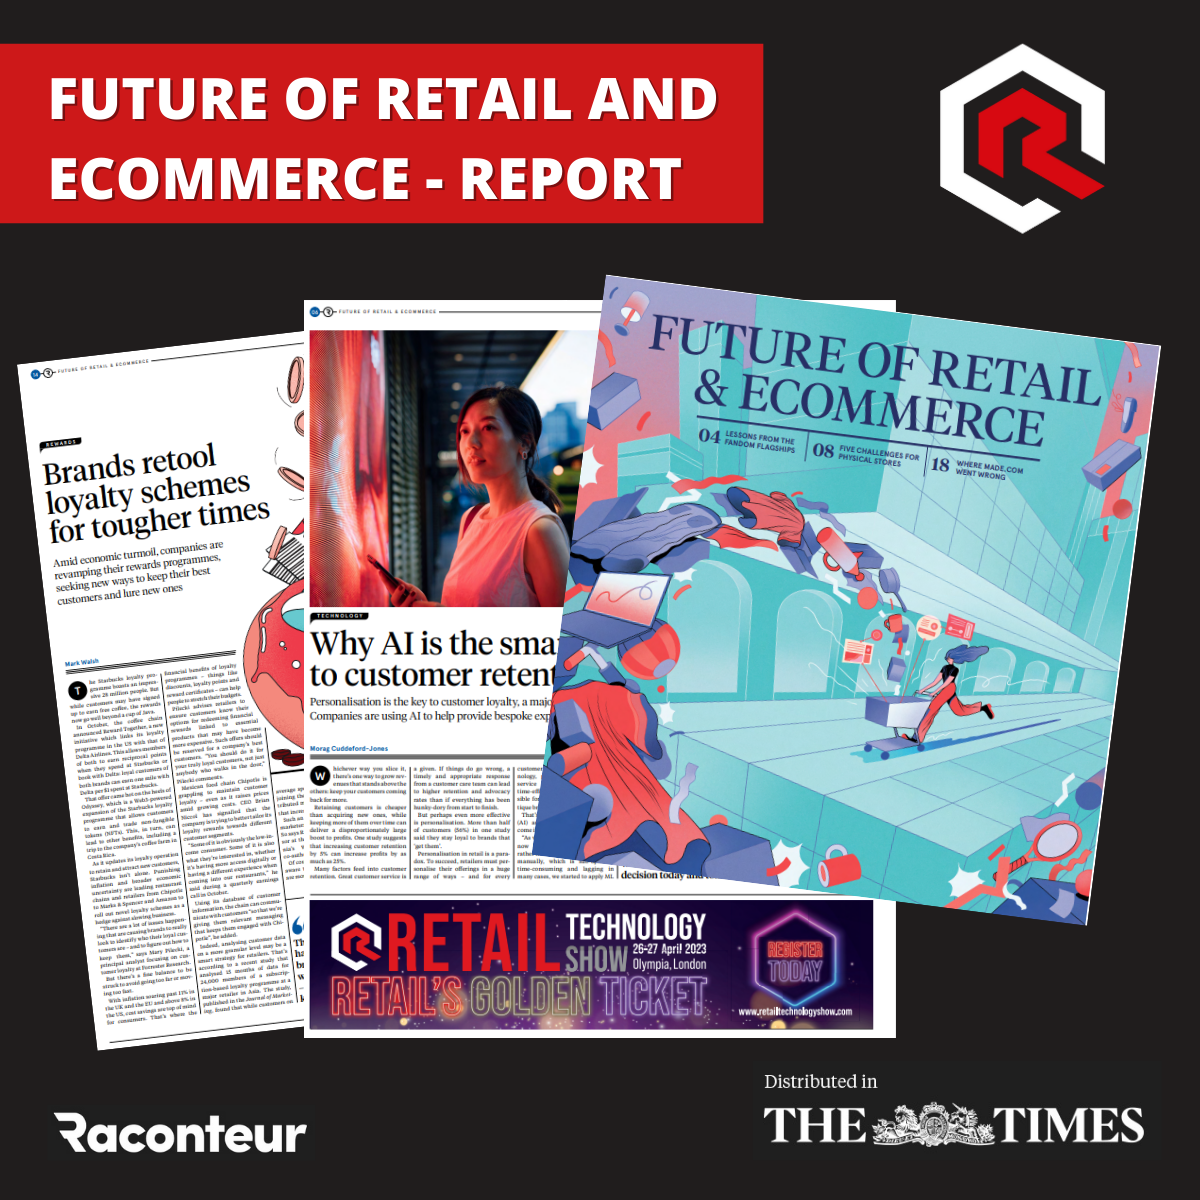 Future of Retail & Ecommerce report